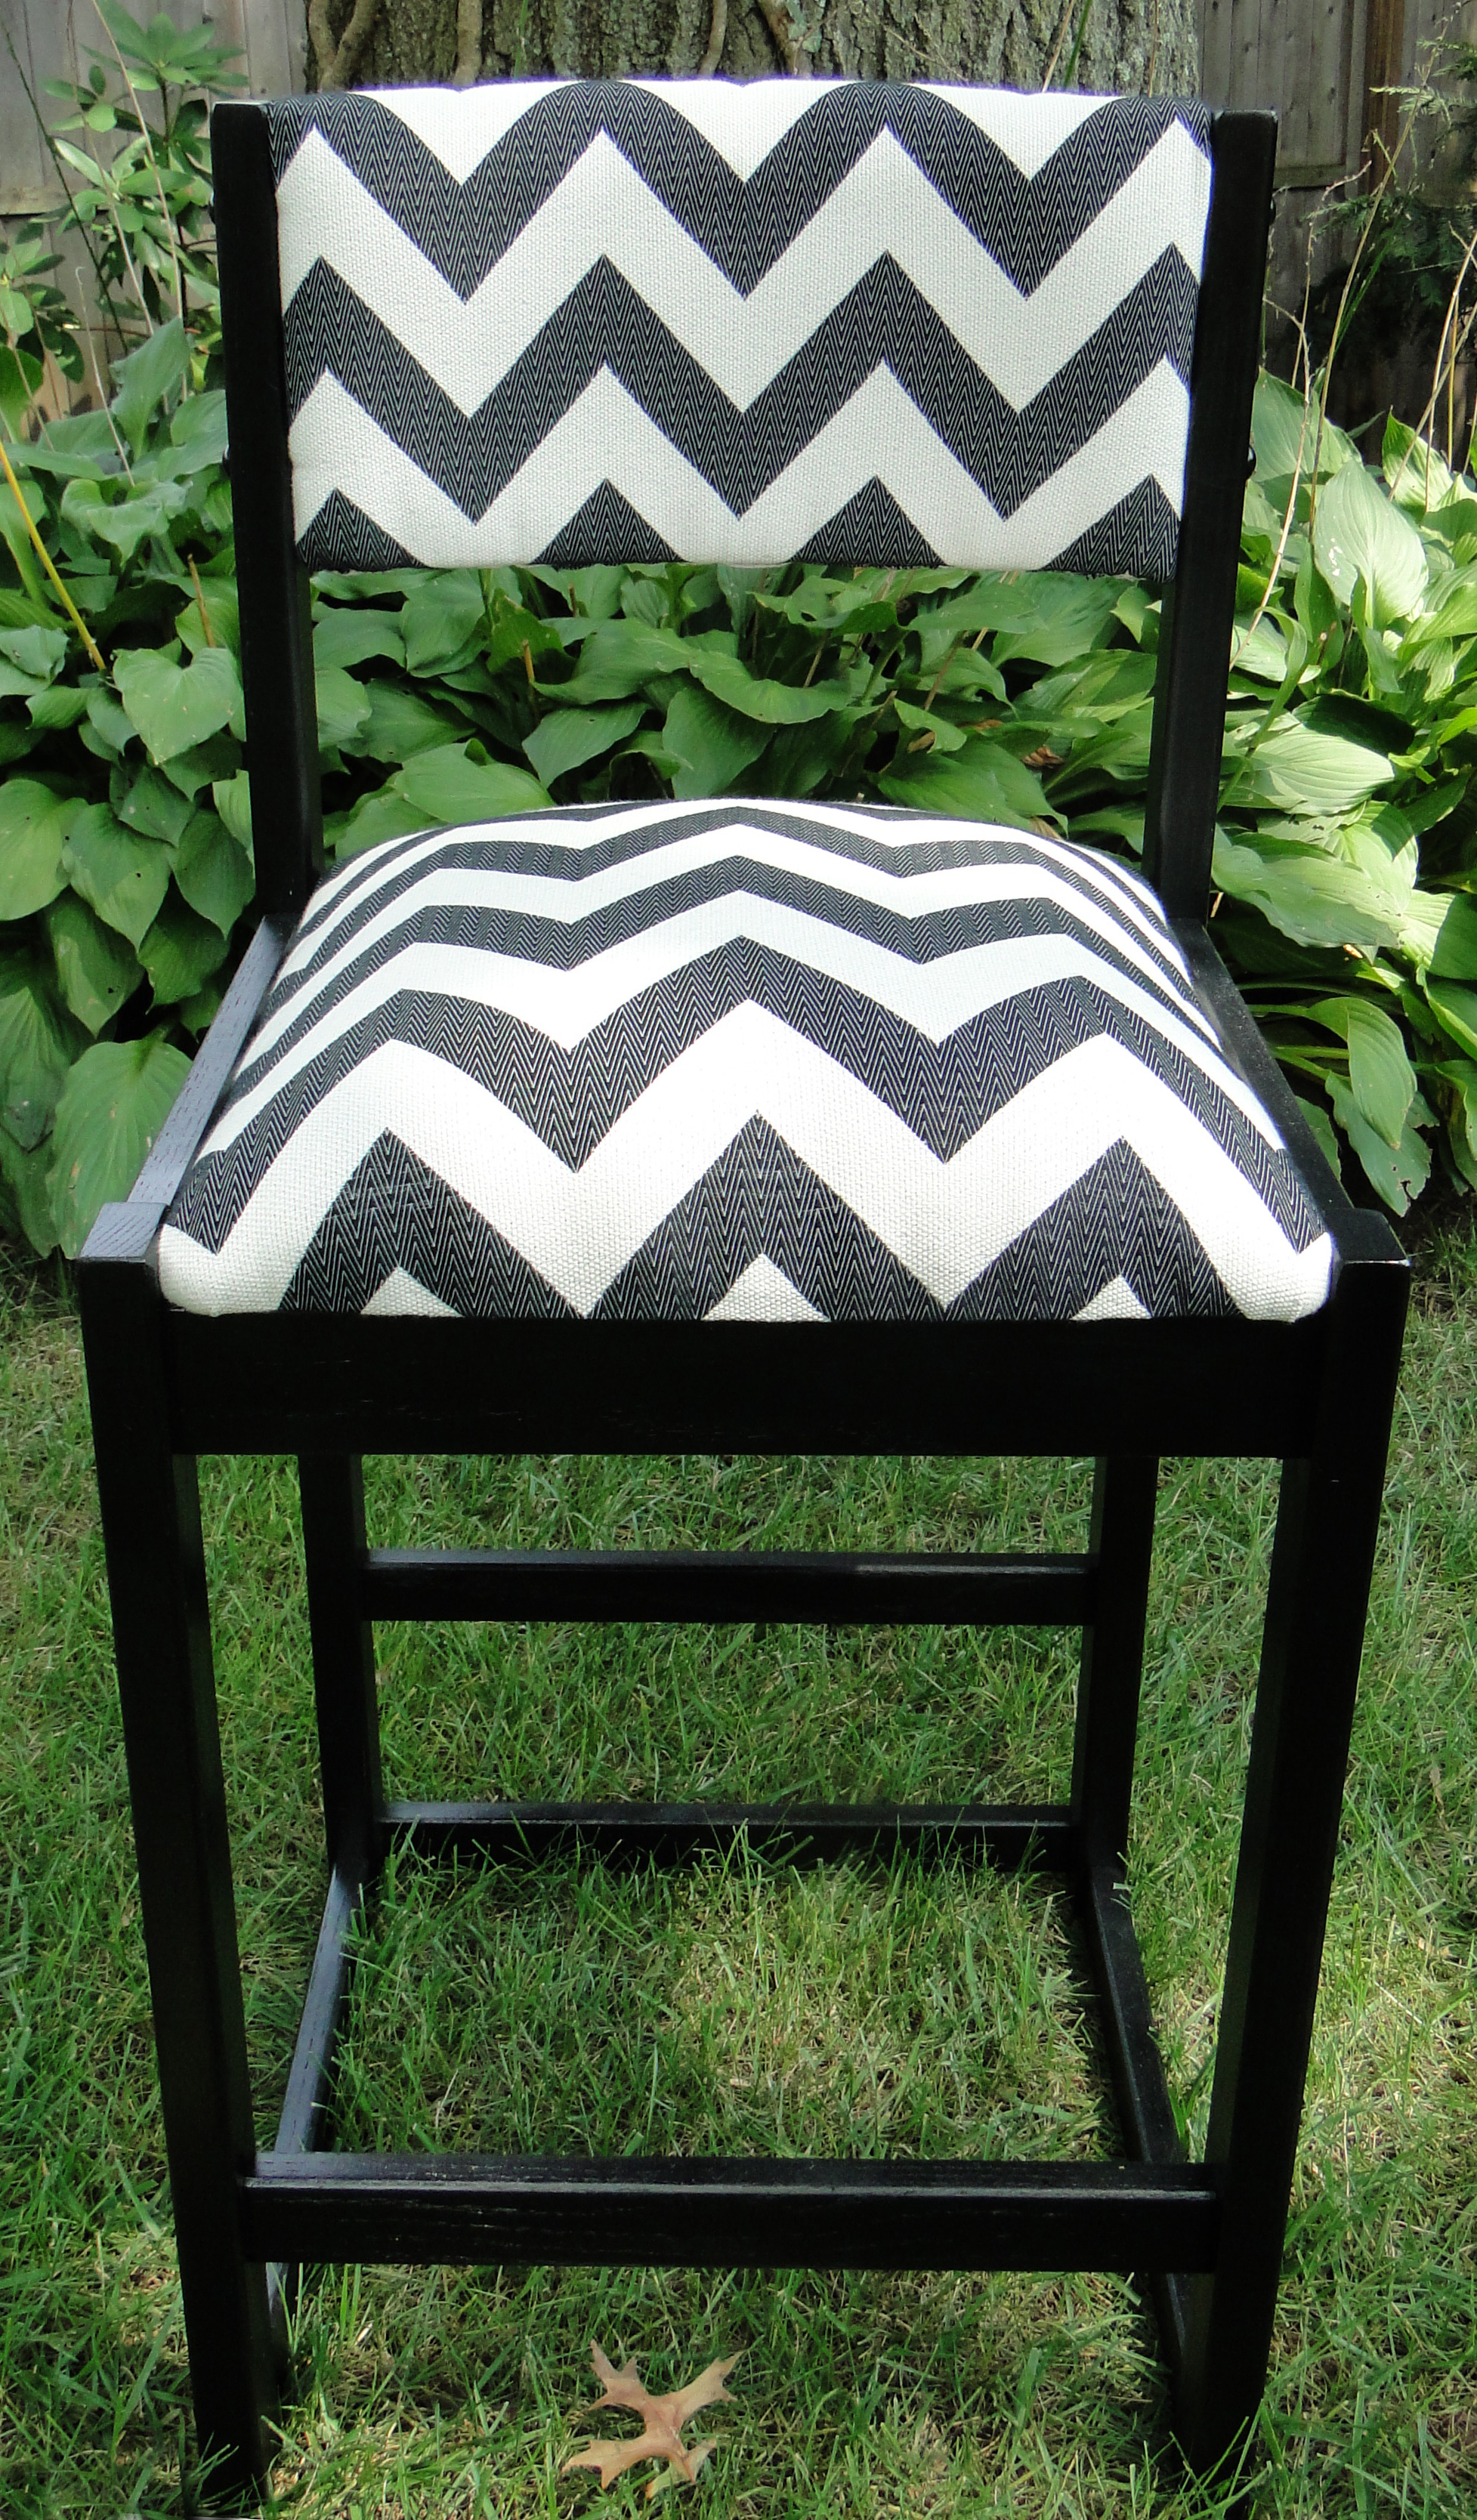 Single chair with makeover